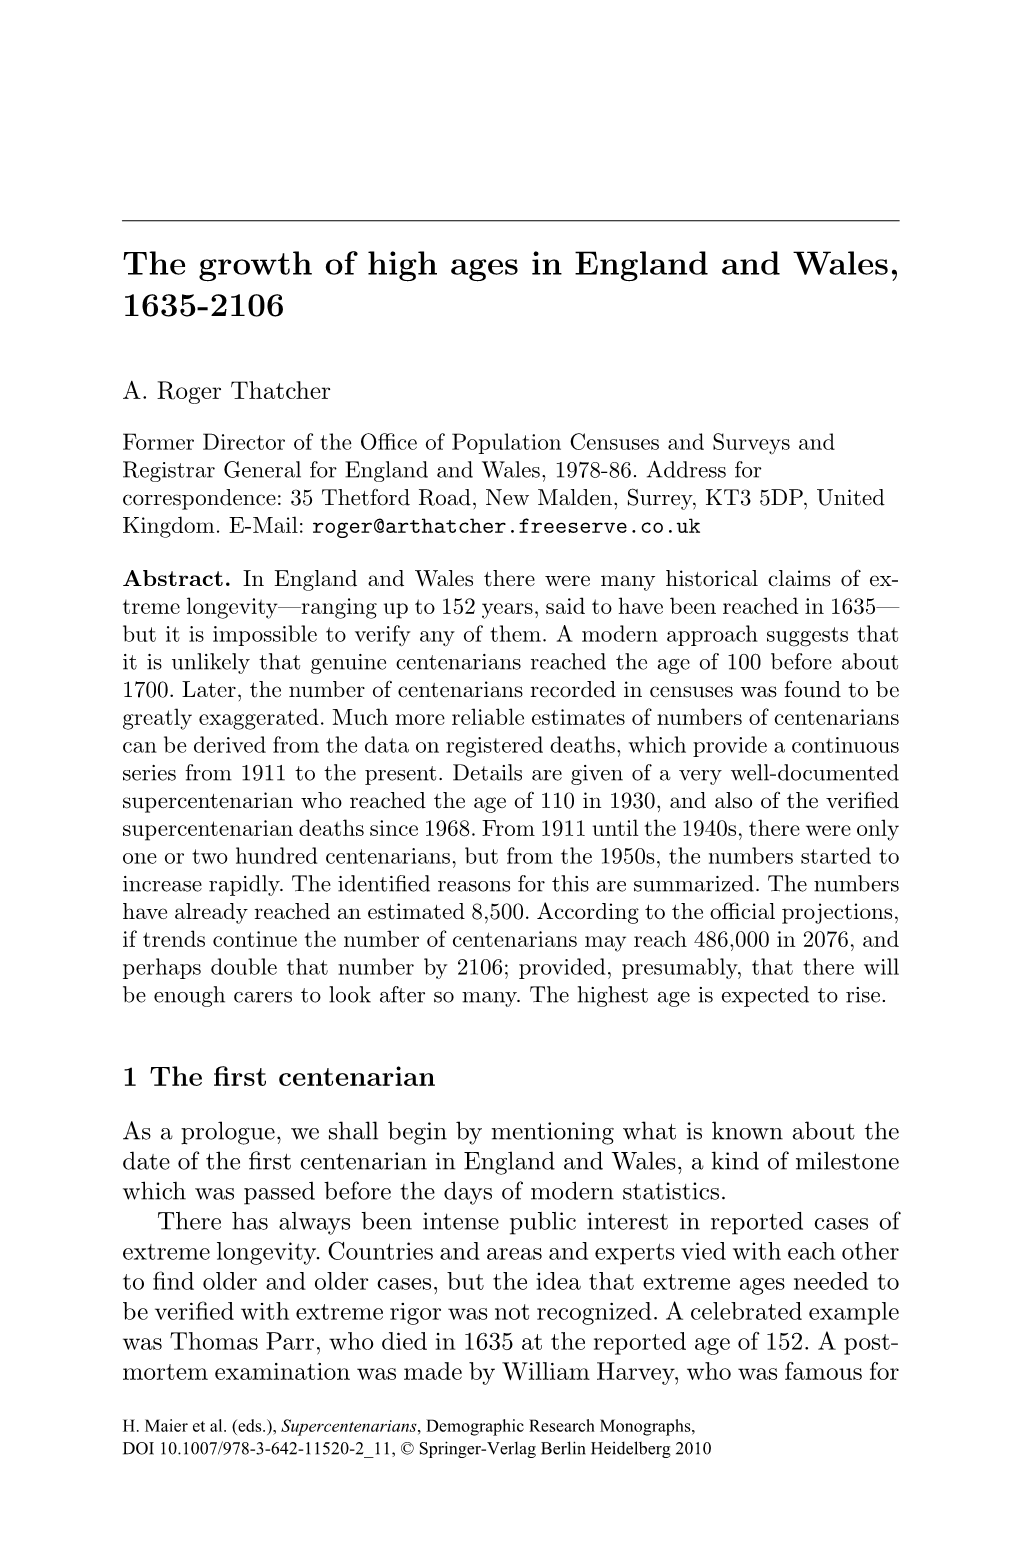 The Growth of High Ages in England and Wales, 1635-2106